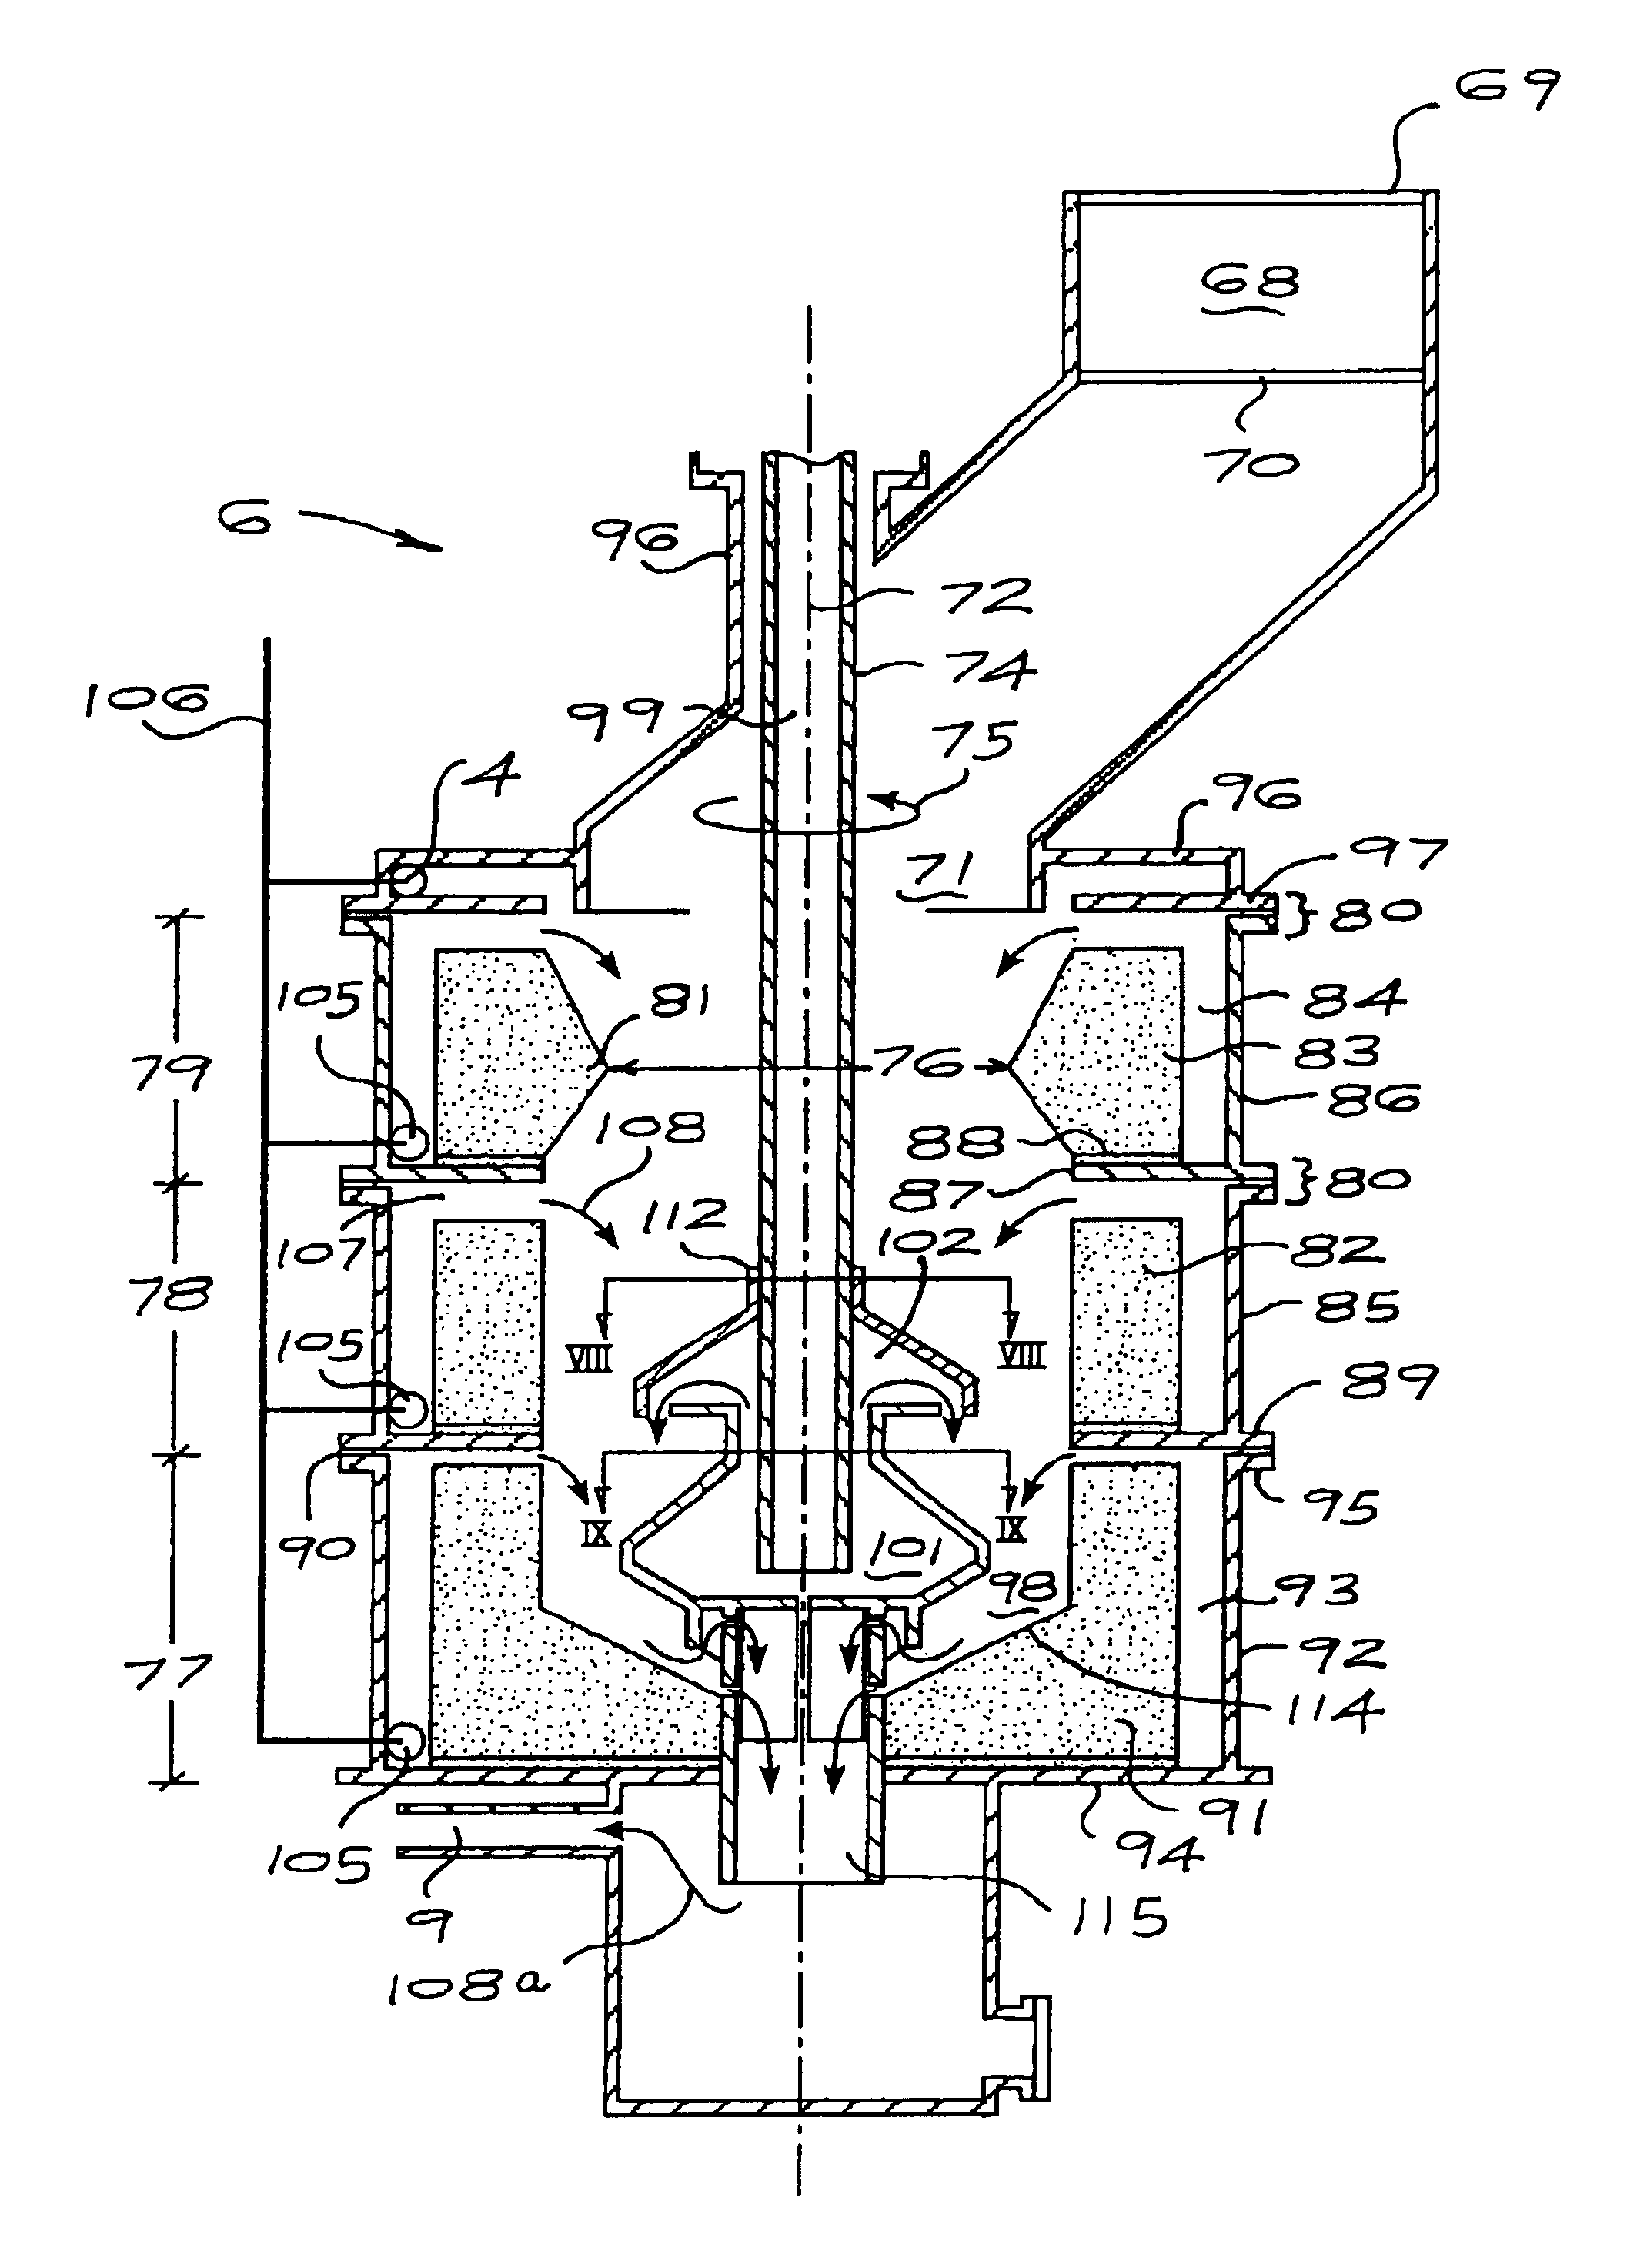 Process and gas generator for generating fuel gas